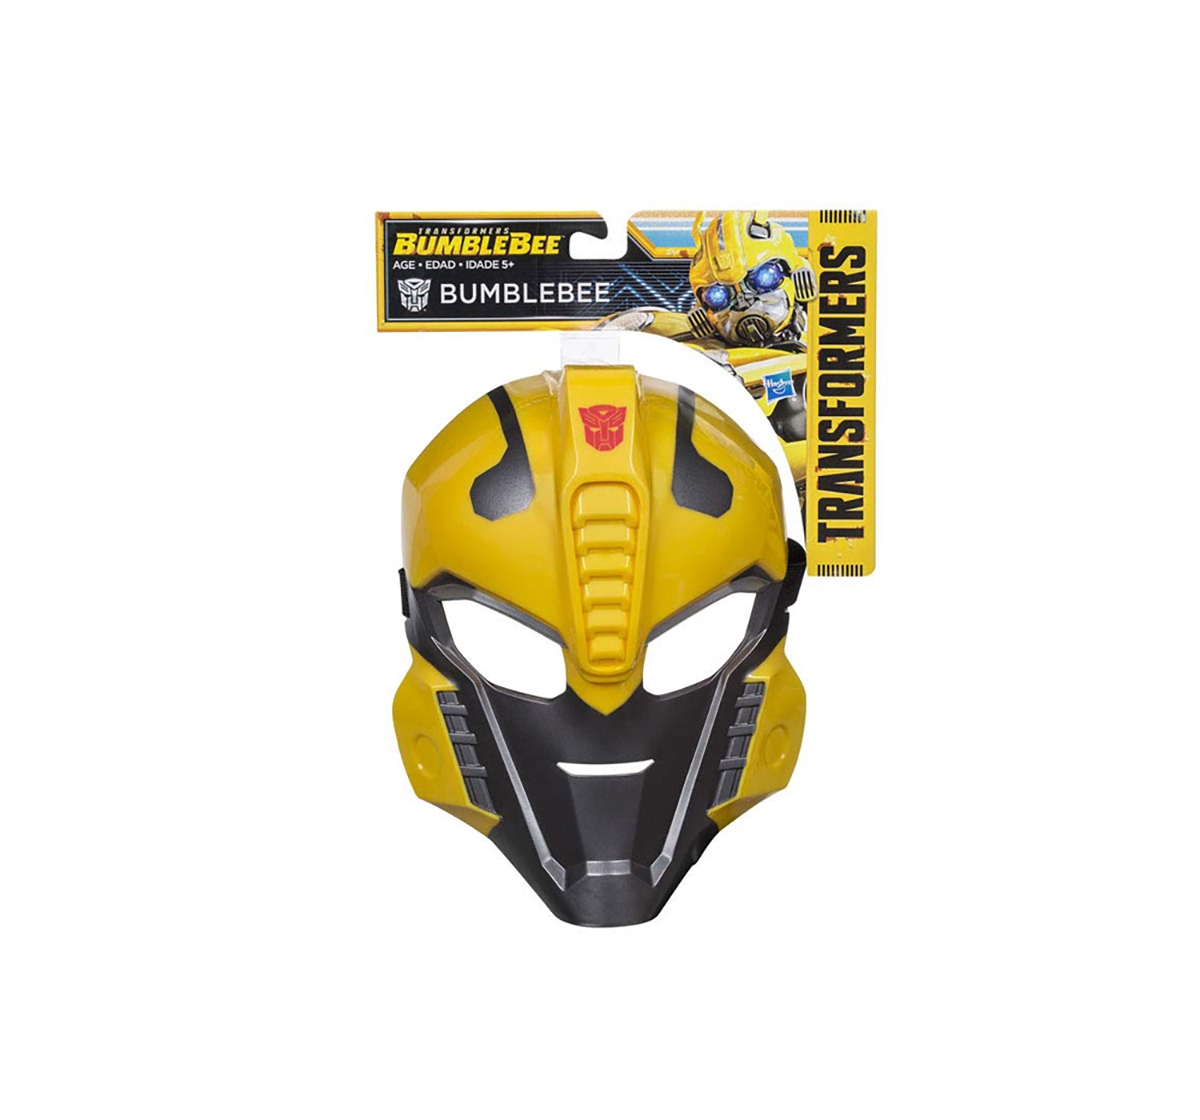 Transformers | Transformers Bumblebee Mask Action Figure Play Sets for Kids age 5Y+ 0